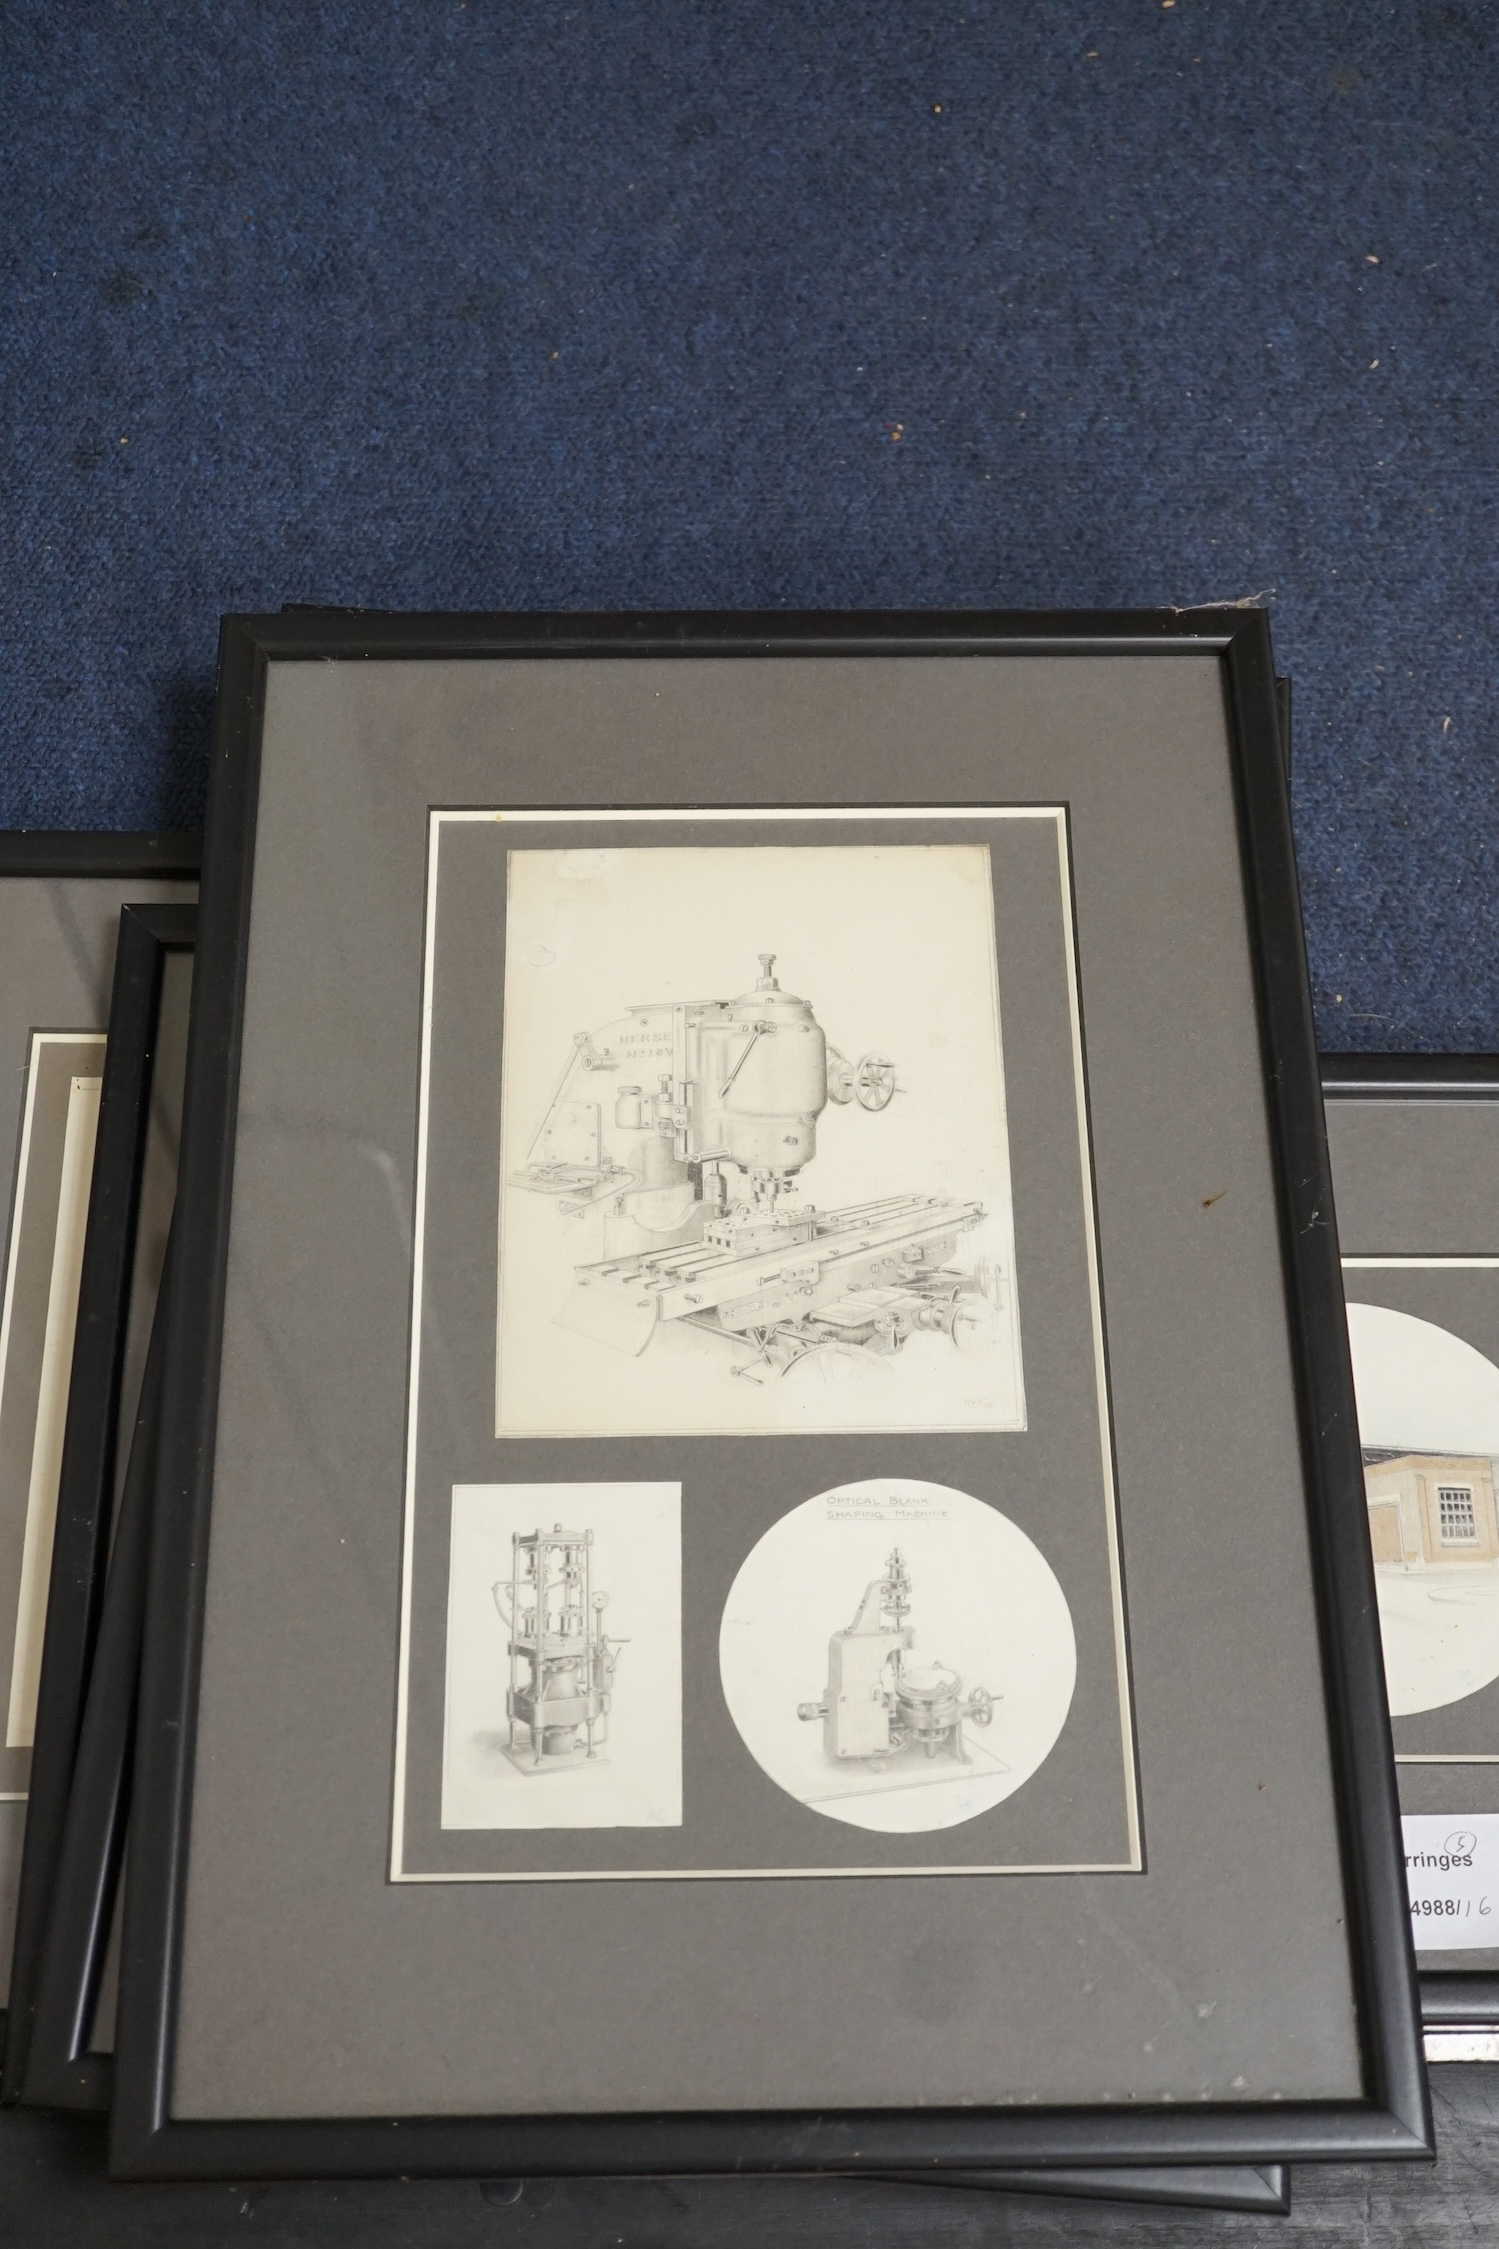 Five watercolour and pencil studies including meticulously observed drawings of electric motors, gears, an accelerometer and a view of a building, possibly designed by Giles Gilbert Scott, 18 x 13.5cm. Condition - fair